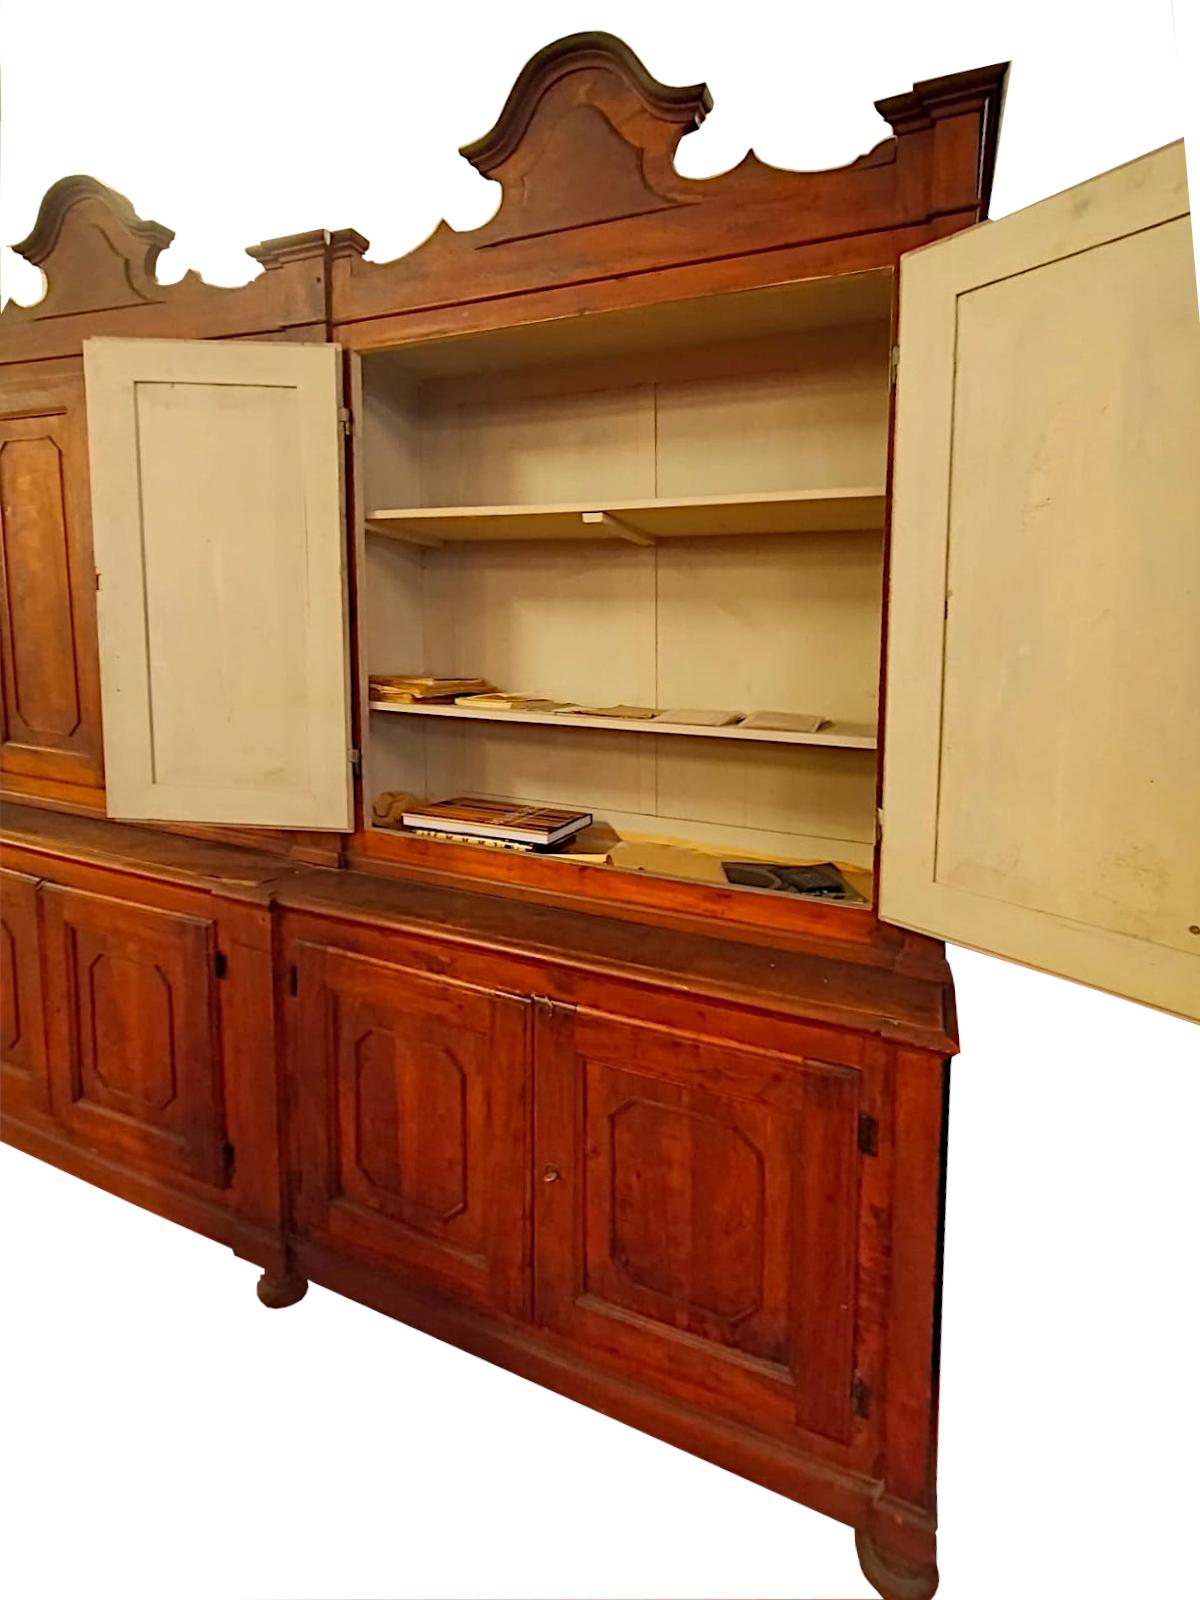 Poplar Large Bookcase, 12 Door Archive, Italy Mid-19th Century For Sale